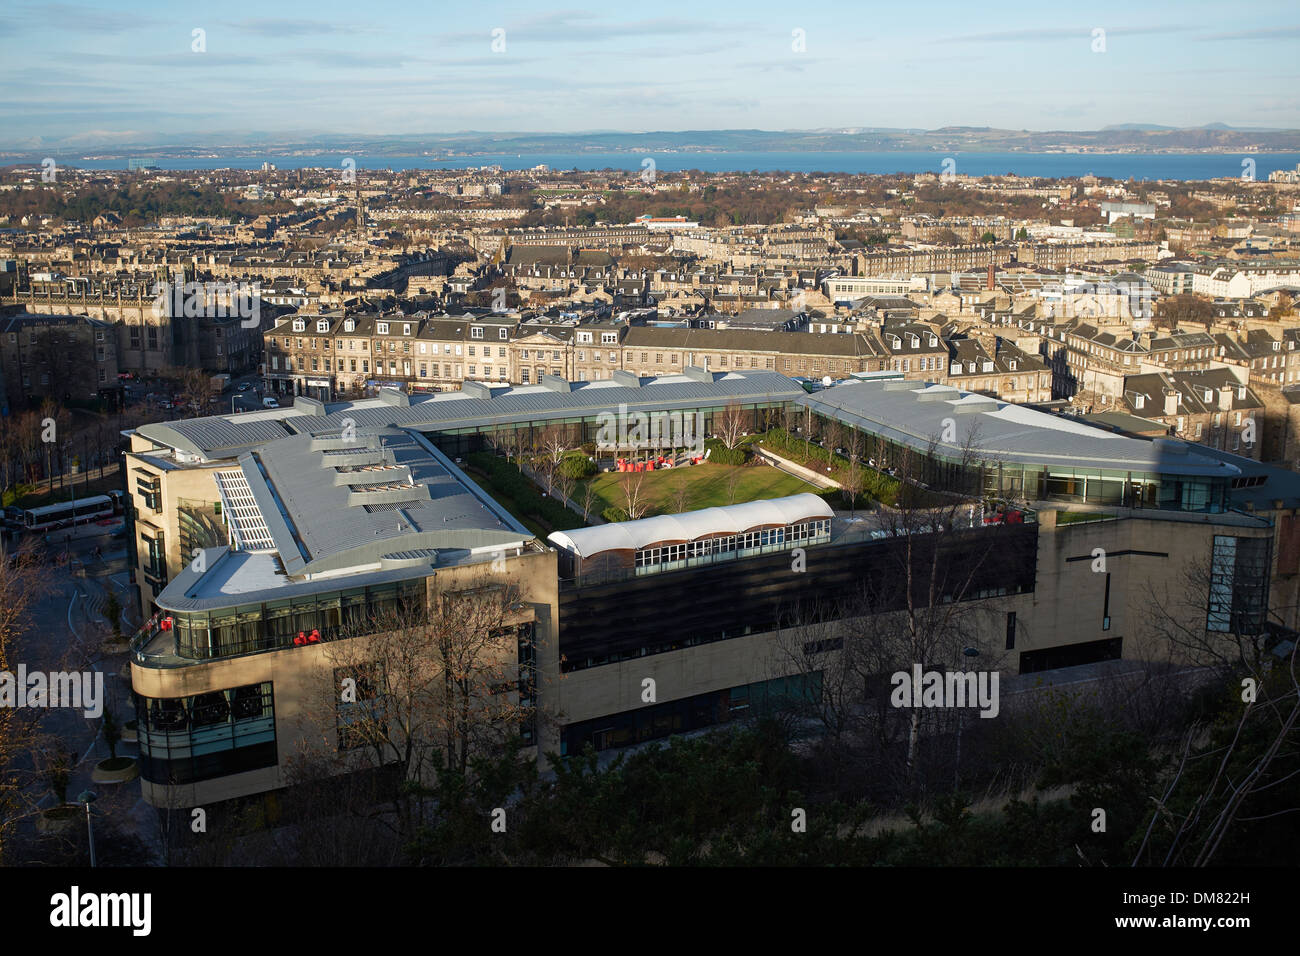 View of the Glasshouse Hotel in Edinburgh city centre from Calton Hill Stock Photo